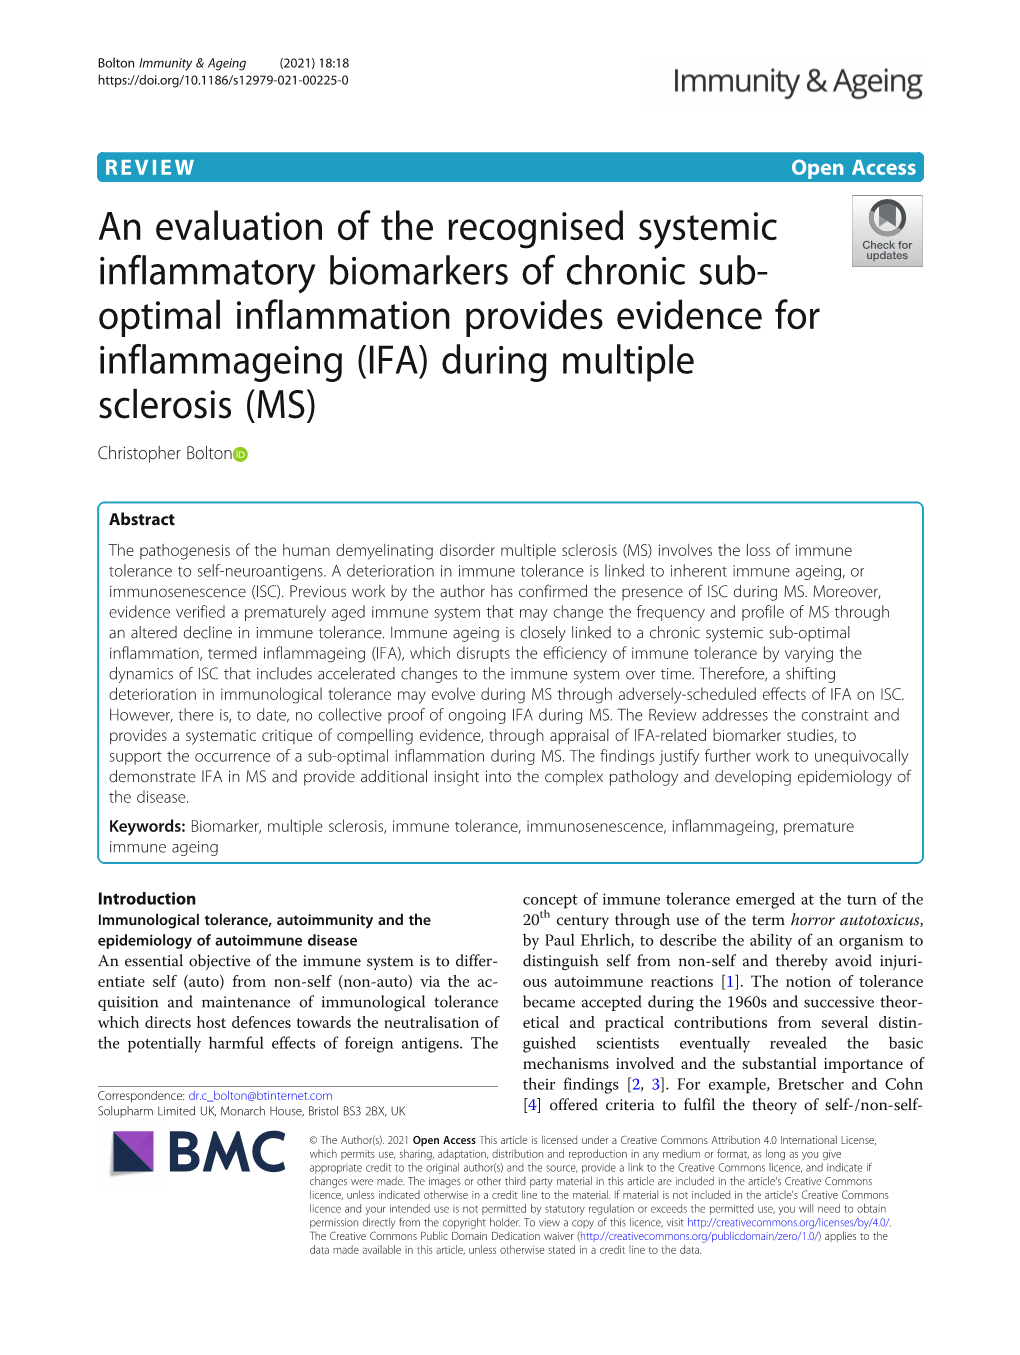 Optimal Inflammation Provides Evidence for Inflammageing (IFA) During Multiple Sclerosis (MS) Christopher Bolton